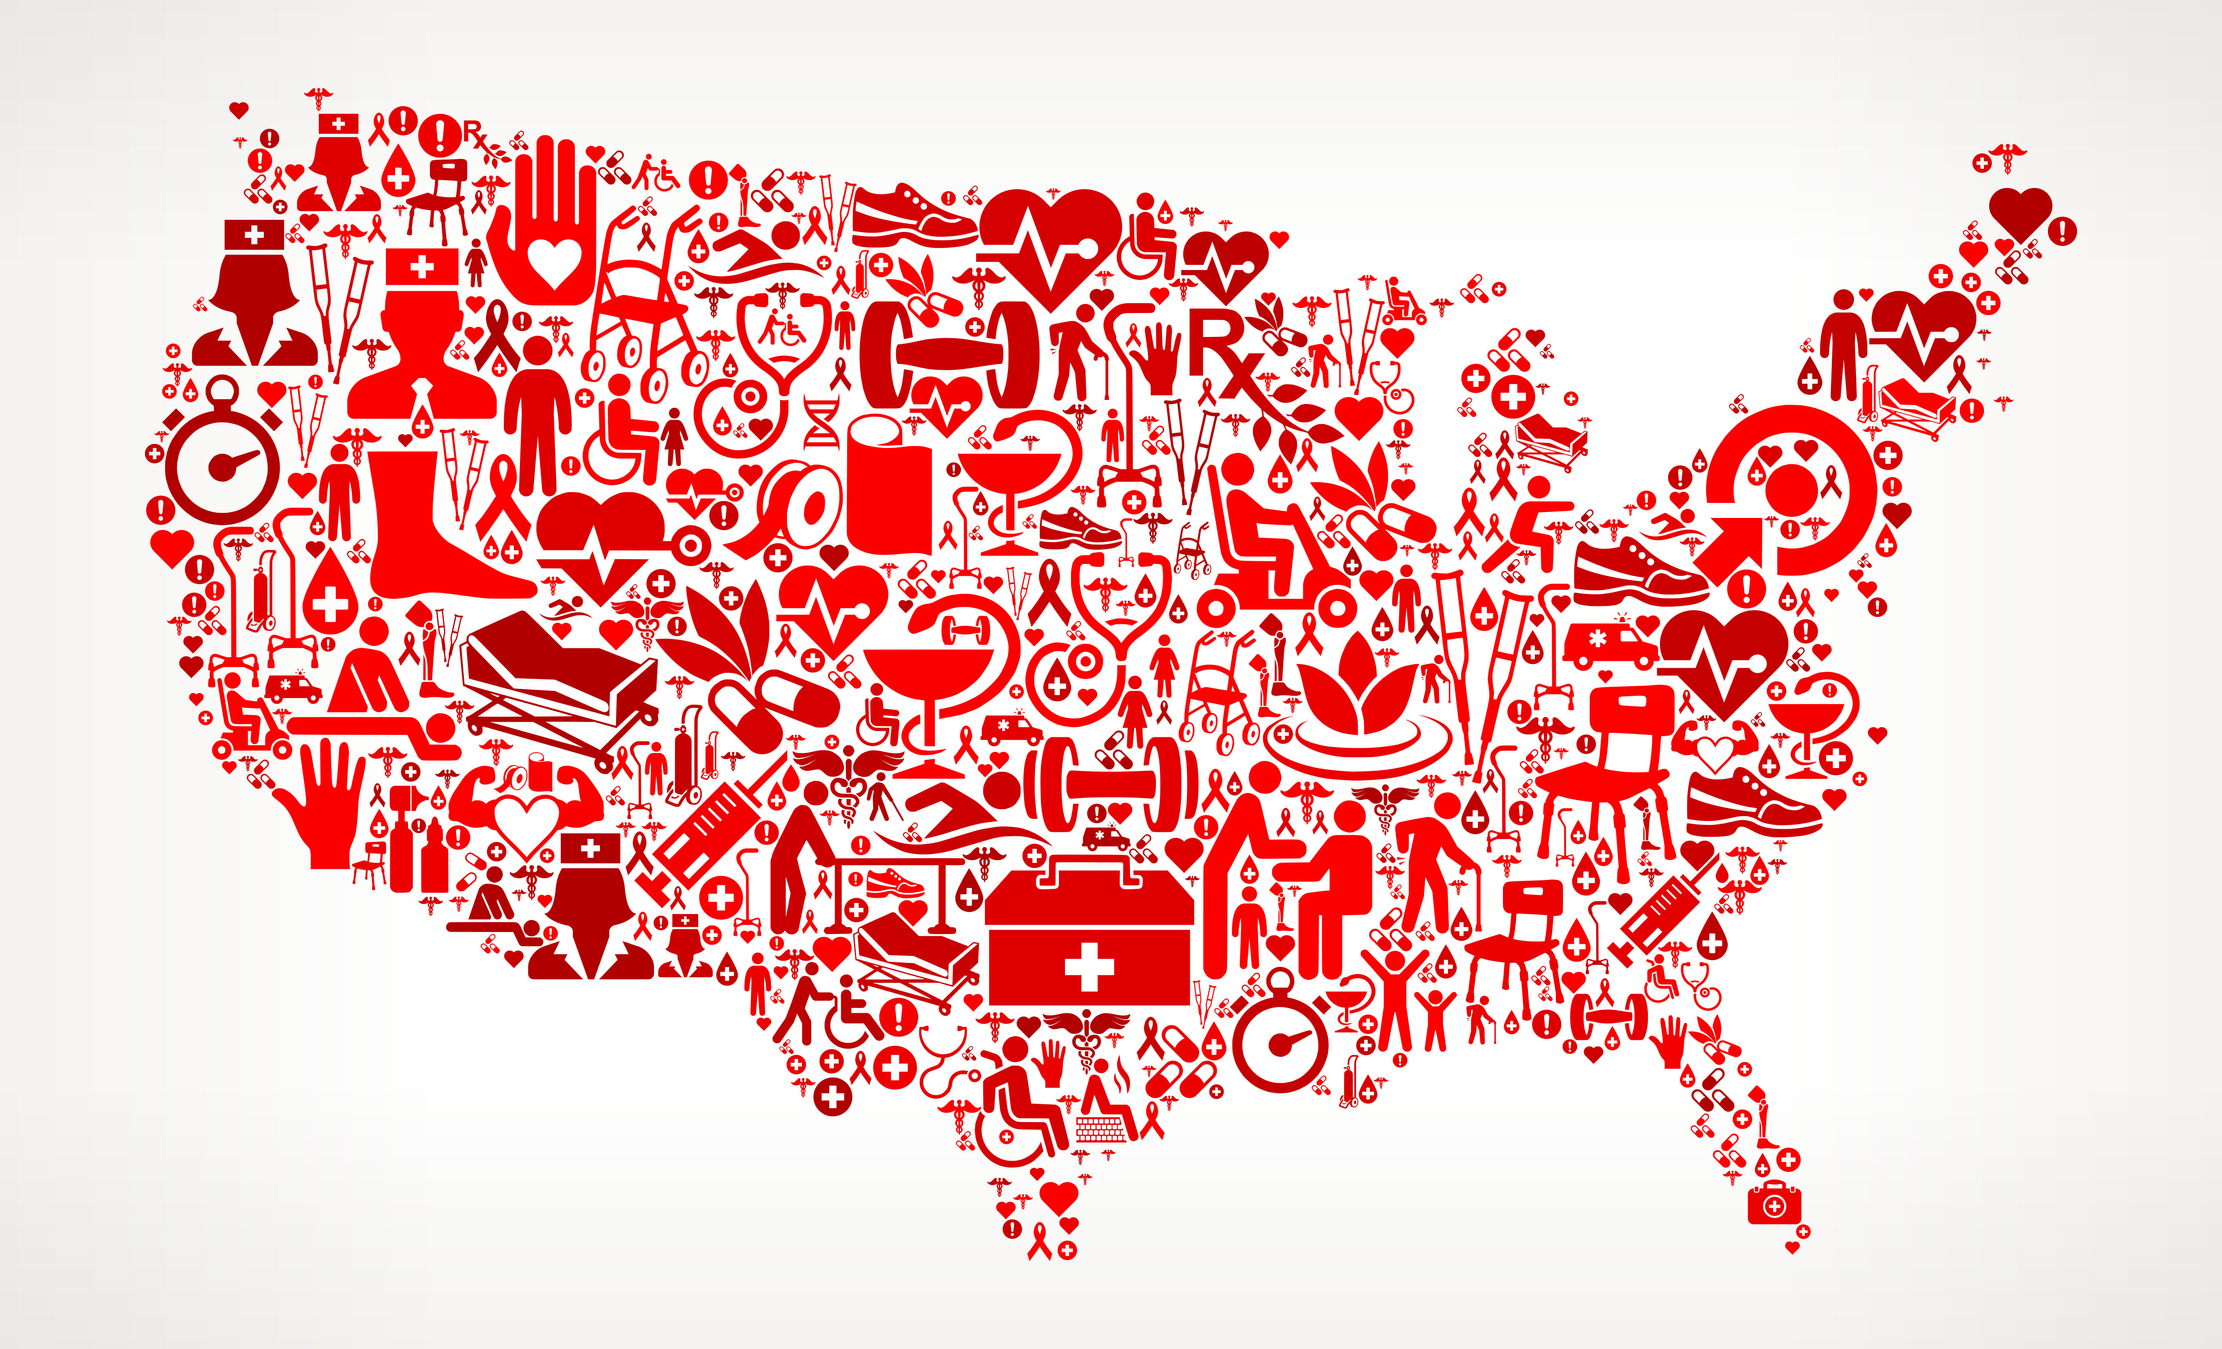 United States Map Medical Rehabilitation Physical Therapy. The medical and rehabilitation icons fill in the main object and form a seamless pattern. The individual icons vary in shade of the red color and scale. They are carefully arranged together and completely fill the outline of the main shape. The icons include such Medical Rehabilitation Physical Therapy icons as medical supplies, first aid kit, people and therapist images and many more icons.